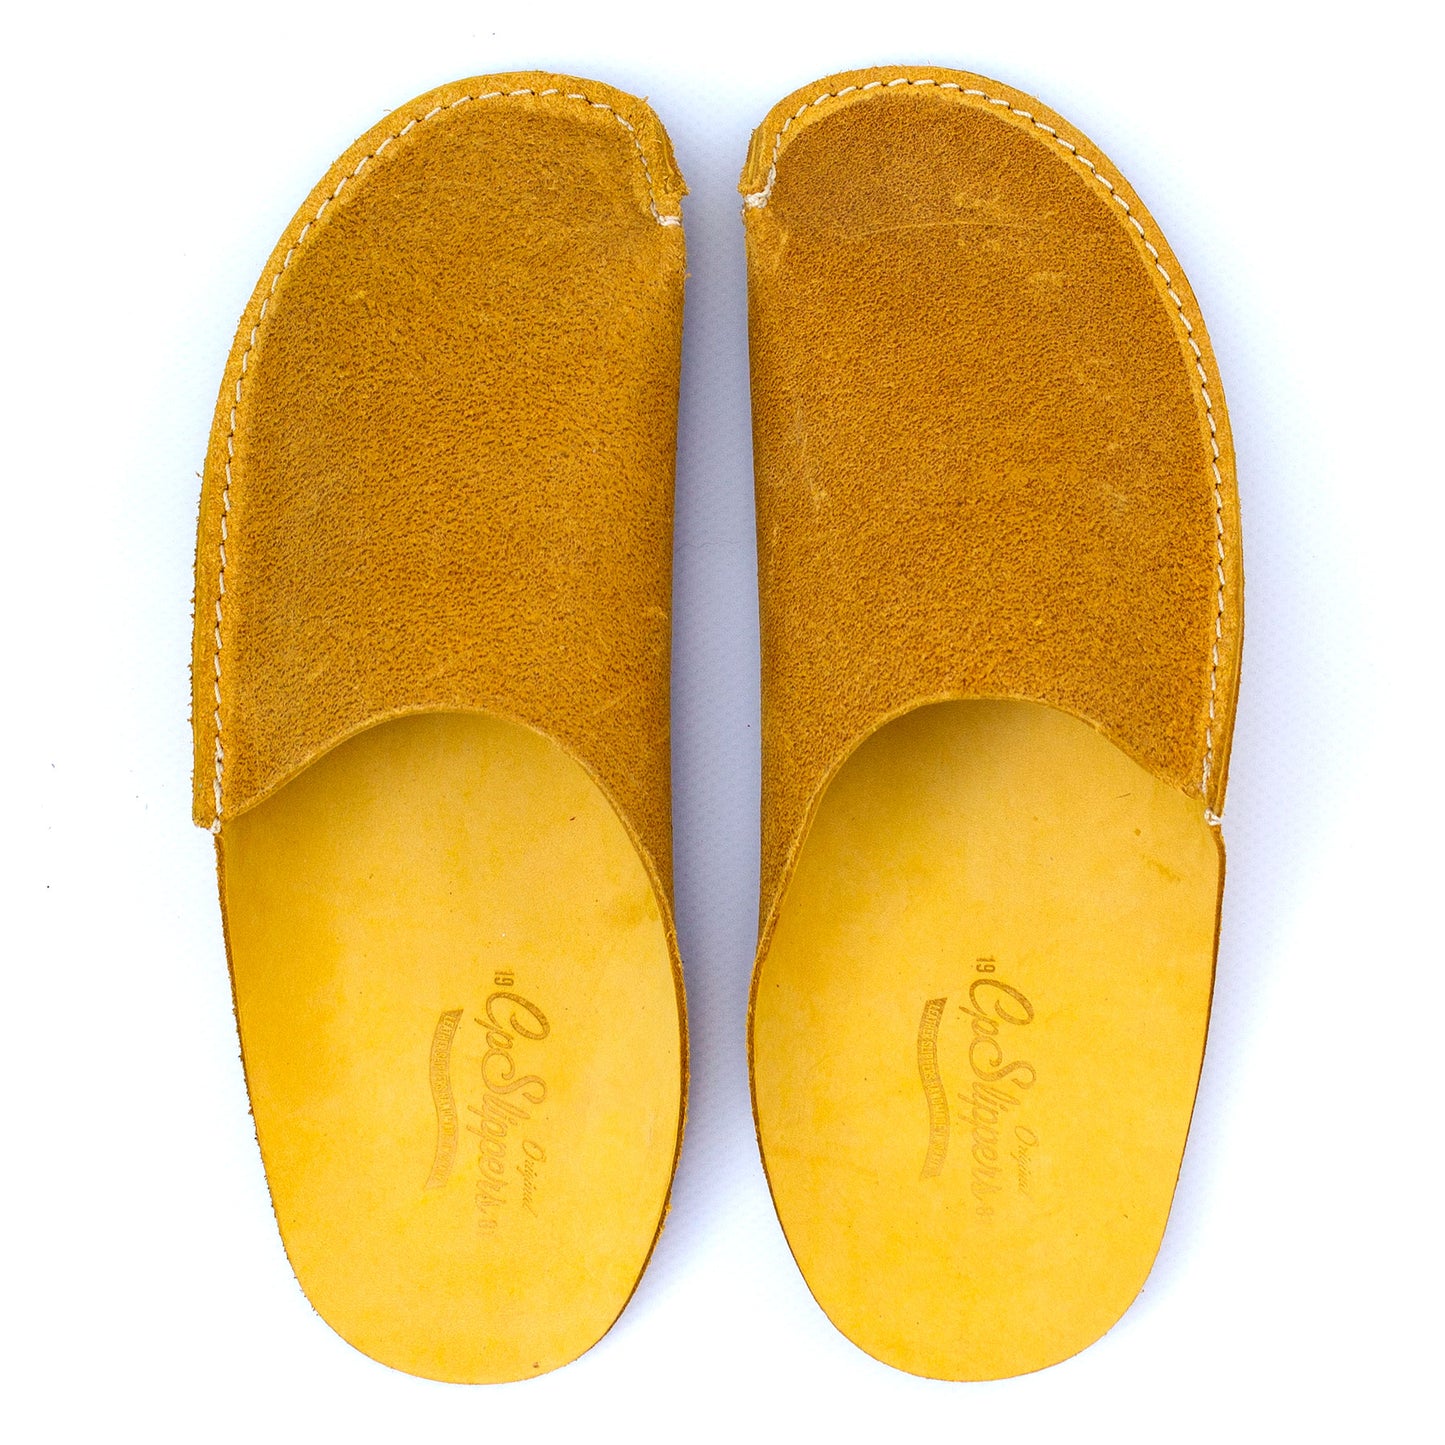 Yellow CP Slippers Minimalist home shoes for man and woman